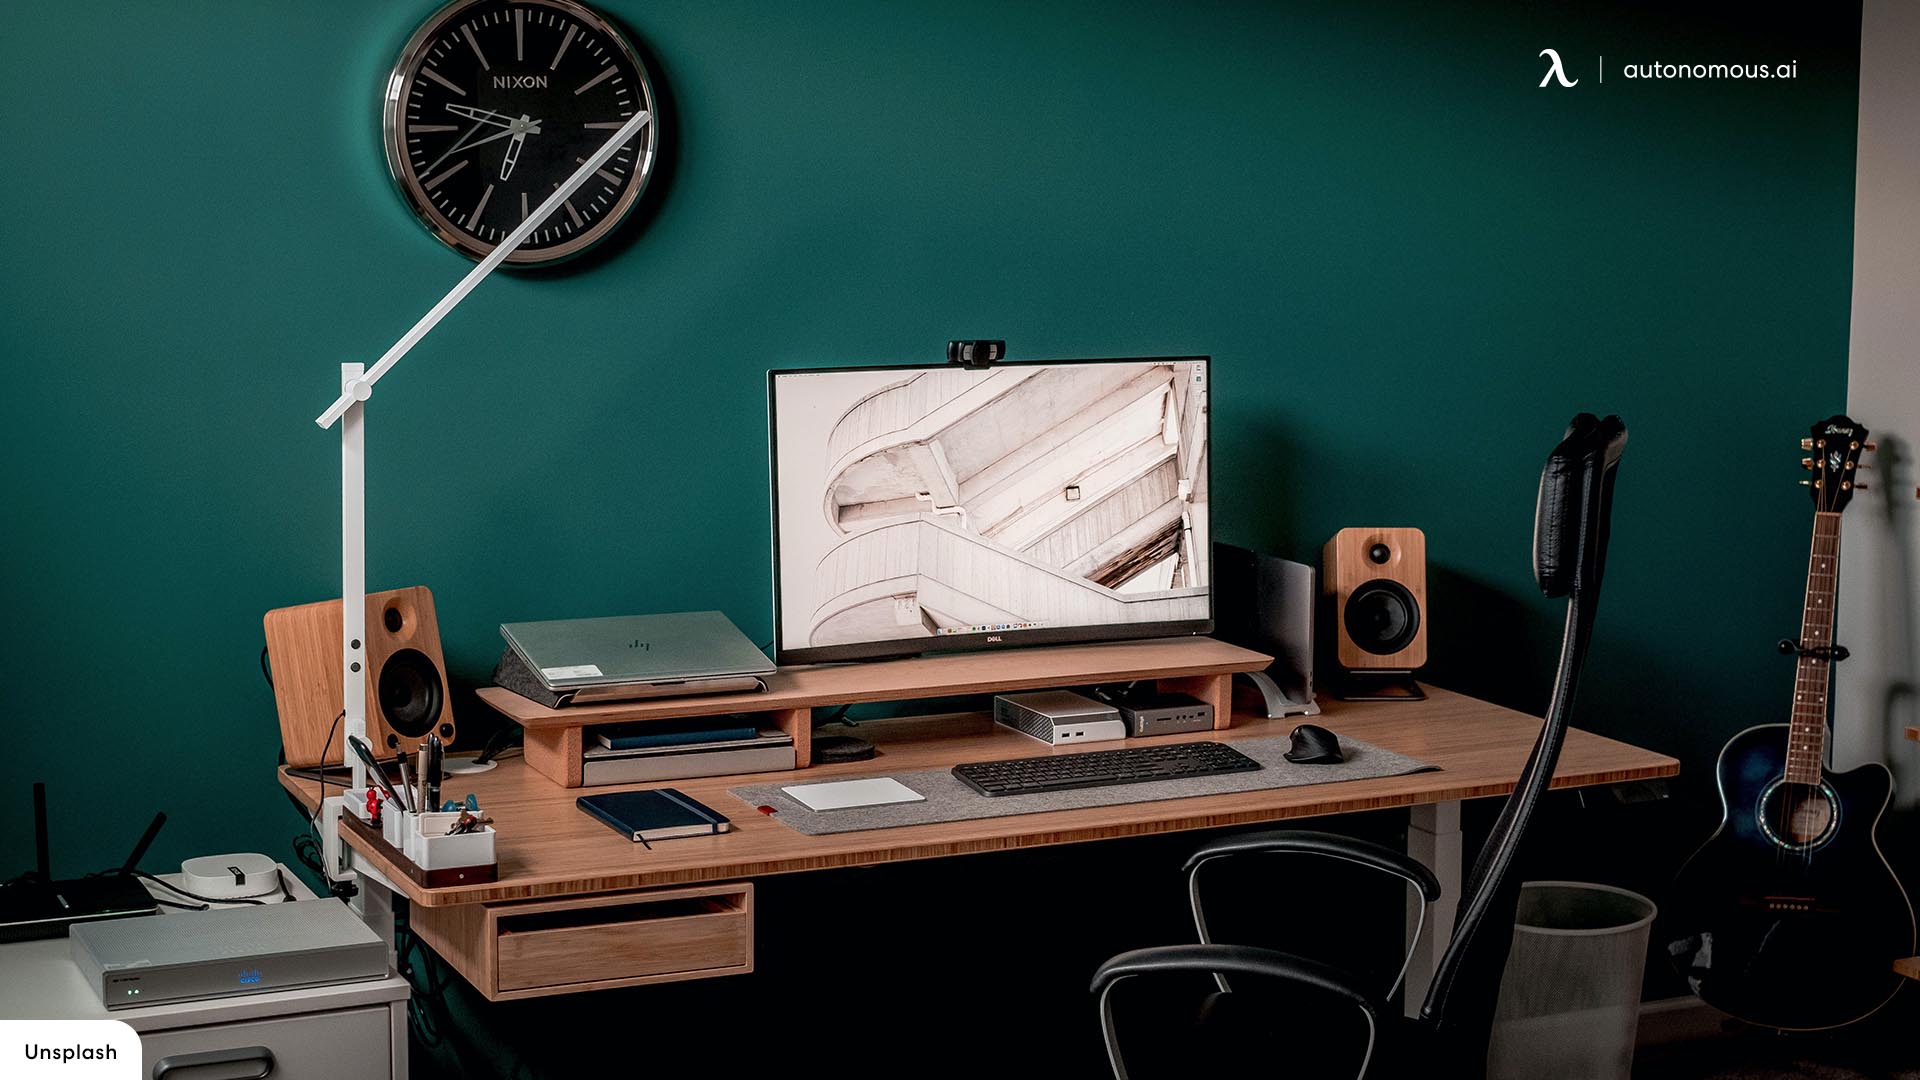 Top 10 Monitor Stands with Organizer to Keep Desk Clean